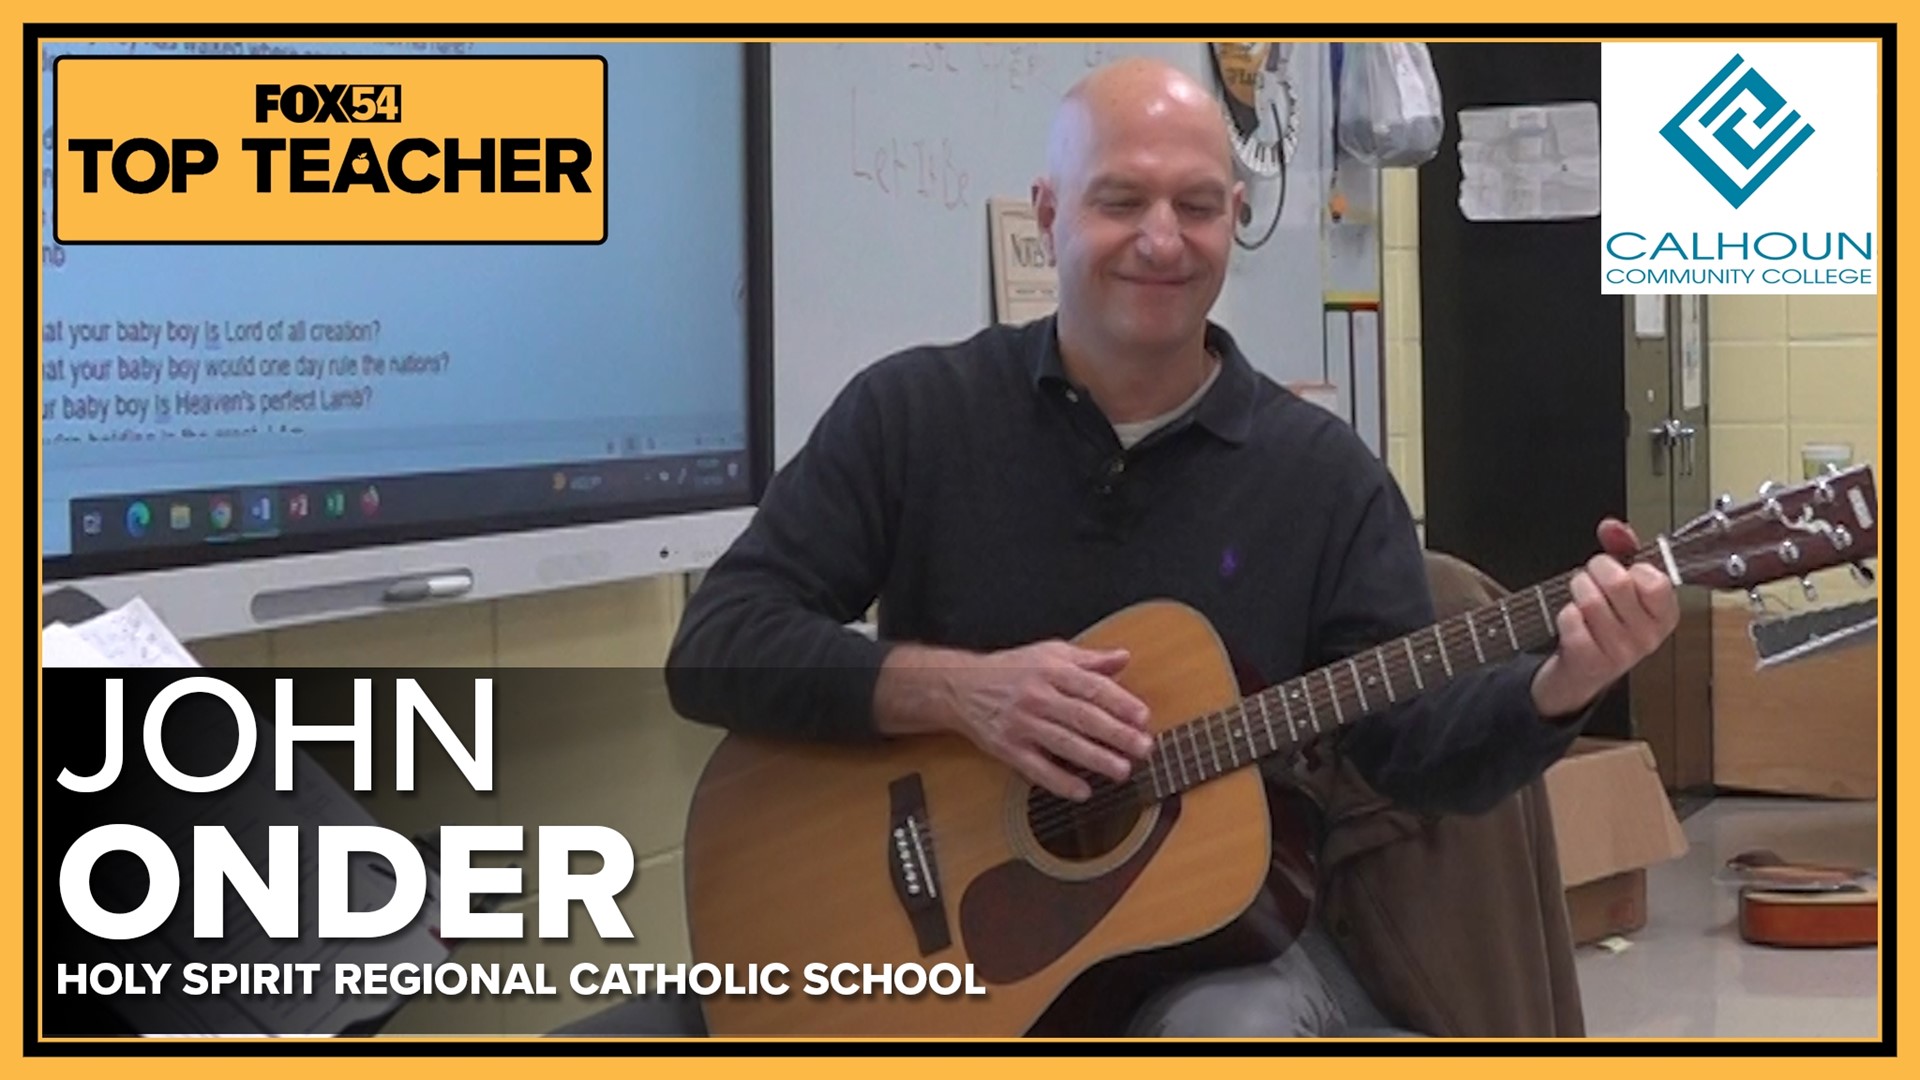 This week’s Top Teacher uses music to inspire his students.